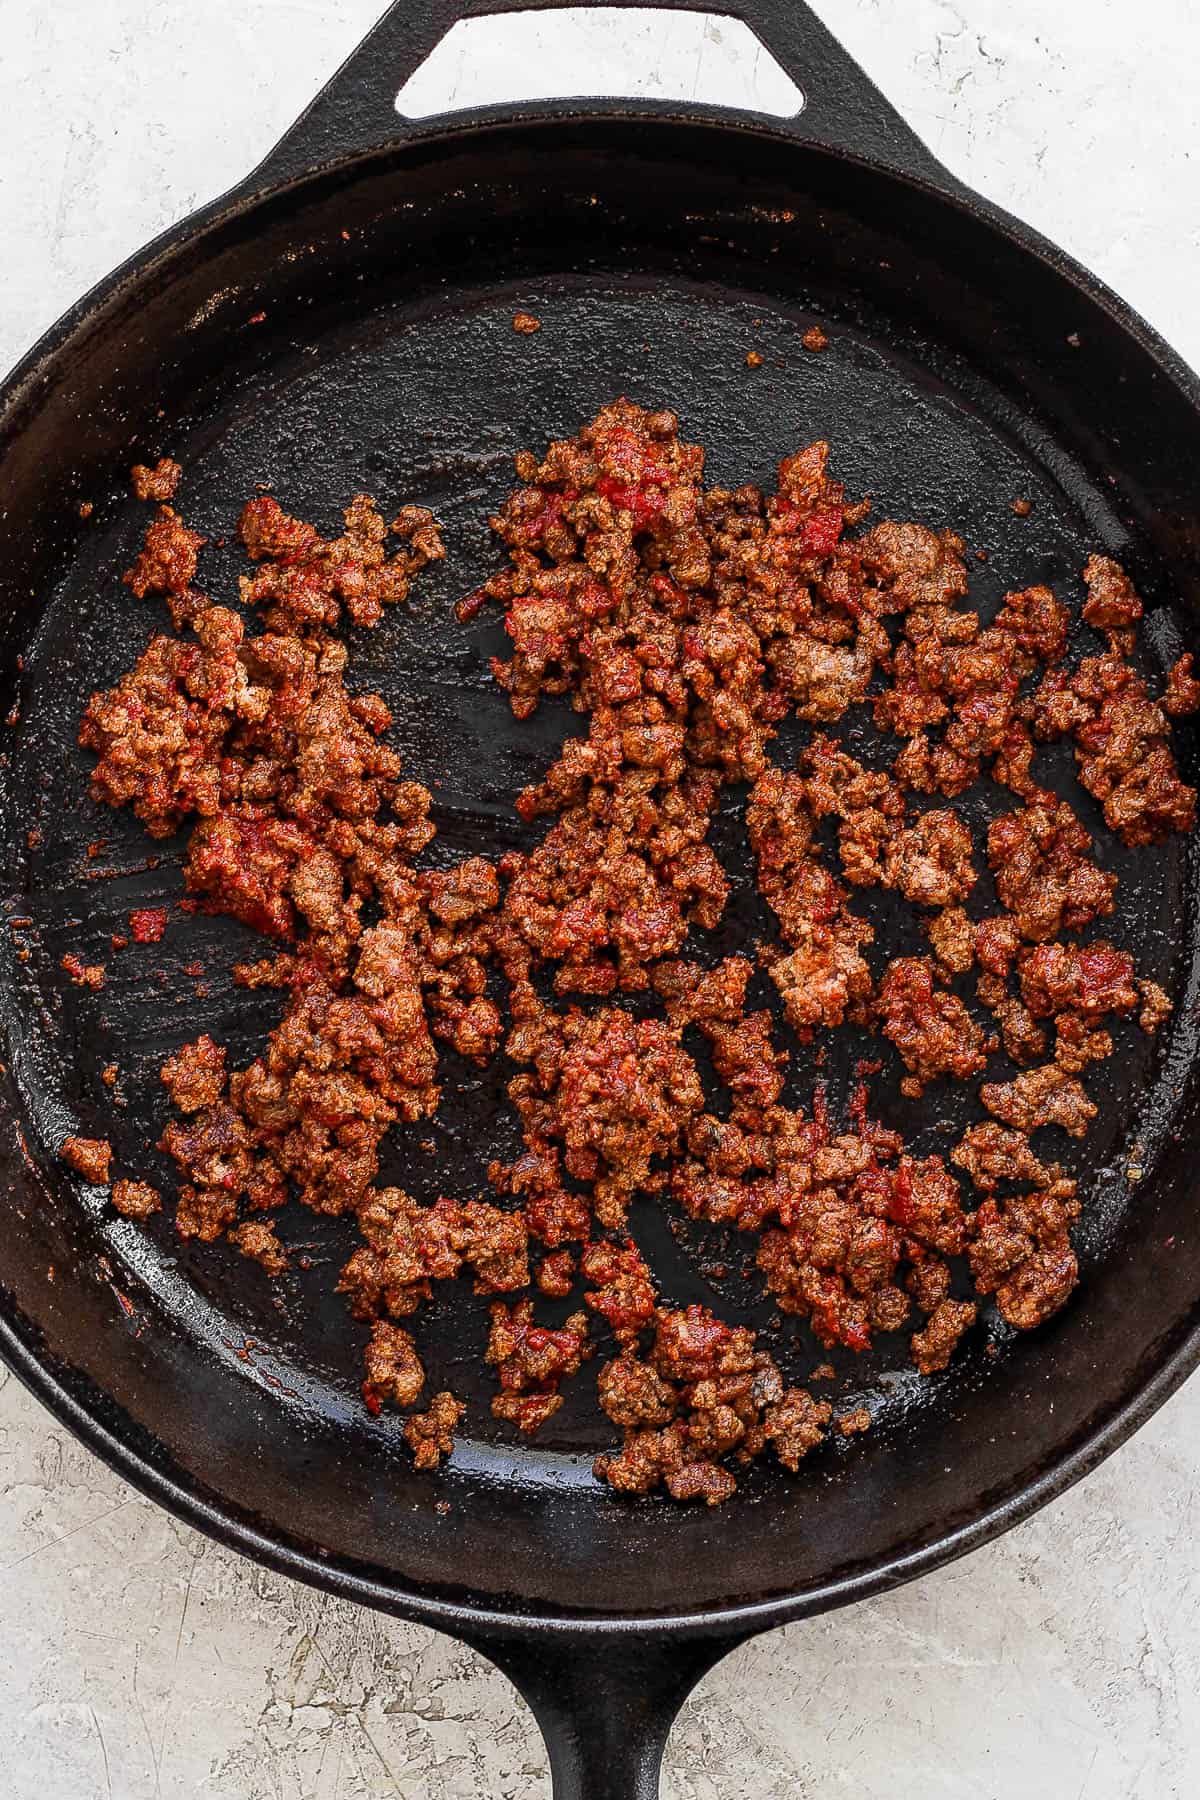 Taco meat being cooked in a cast iron skillet.